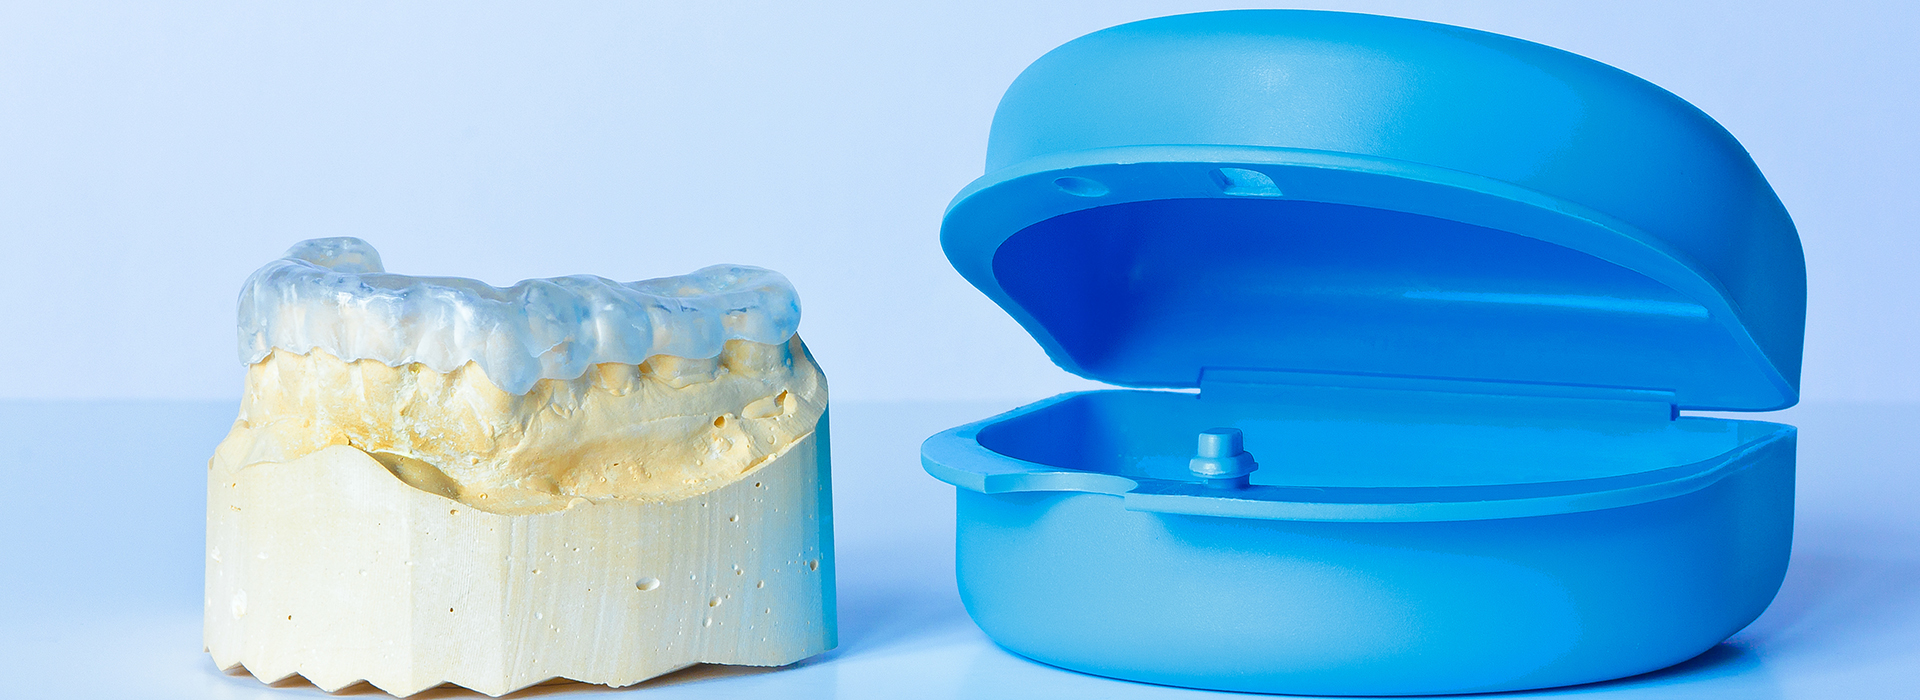 The image shows a blue dental impression tray next to a yellow resin model, which appears to be a 3D printed representation of a tooth and its surrounding gumline.